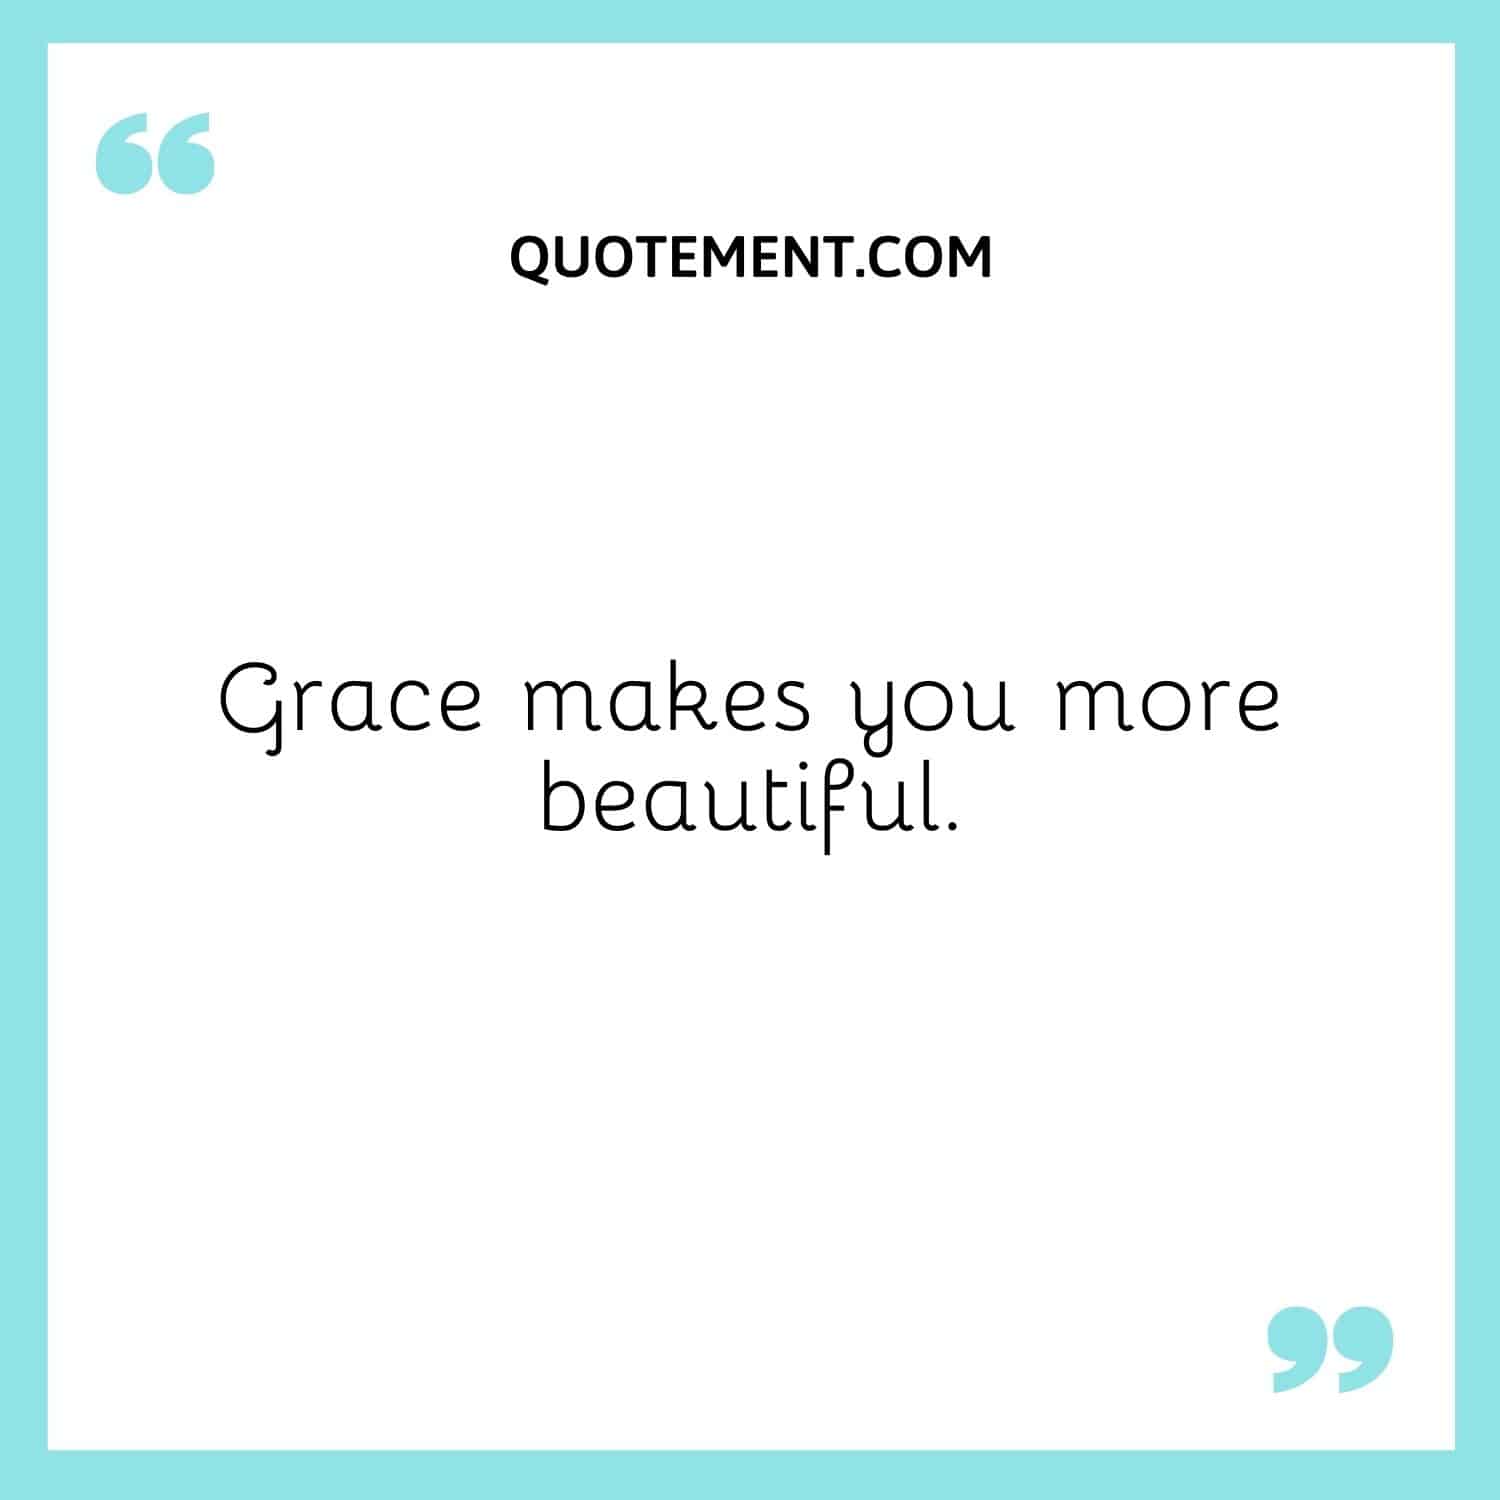 Grace makes you more beautiful.